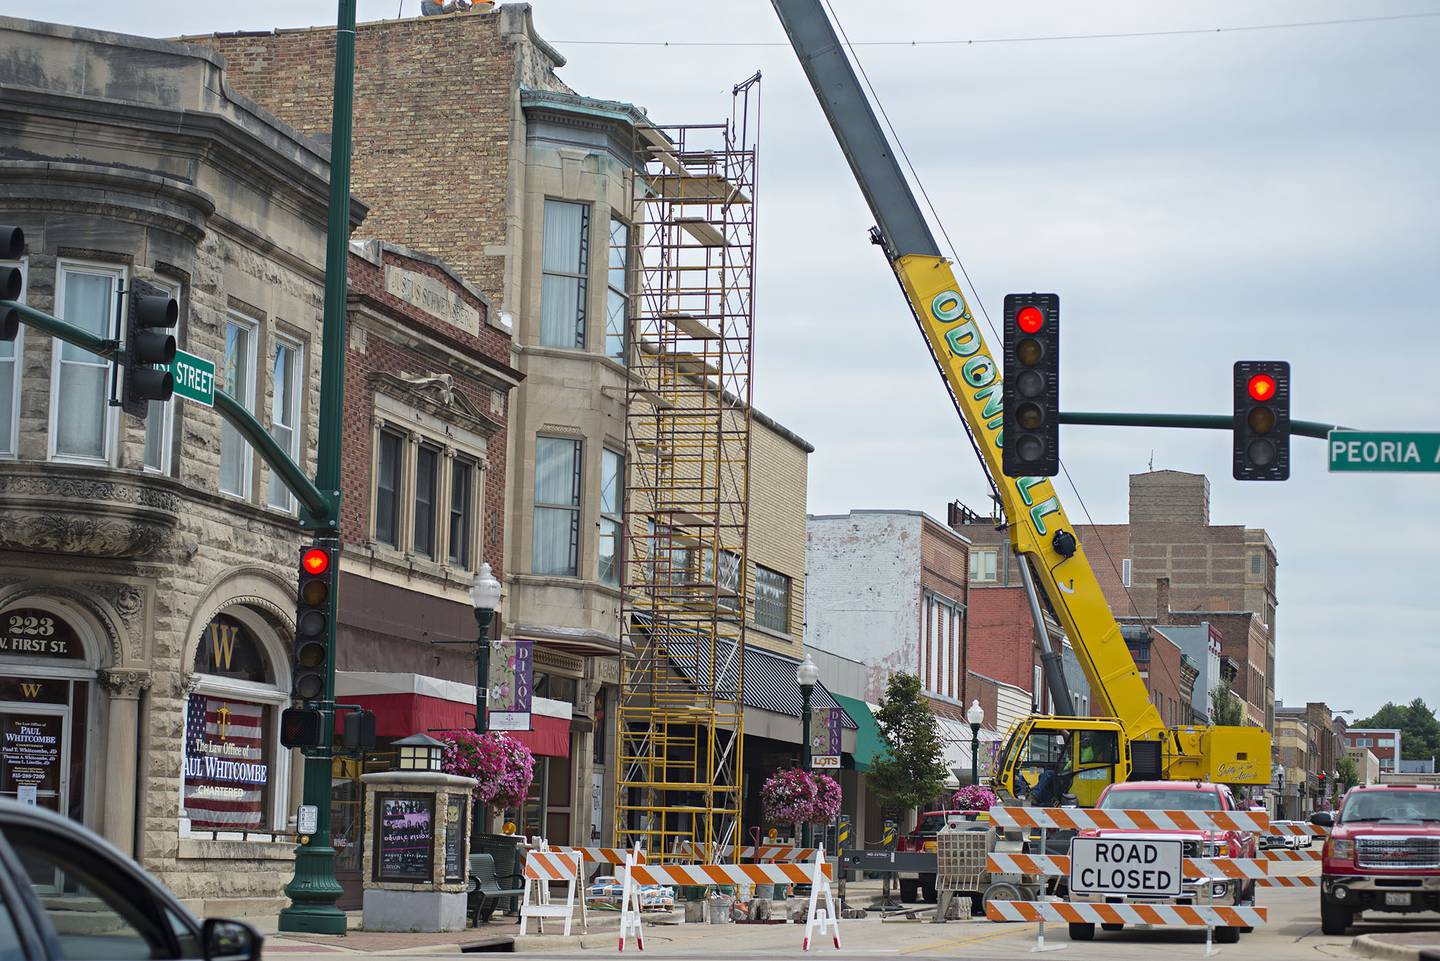 First Street in Dixon is closed to vehicle traffic between Peoria and Hennepin Thursday, July 28, 2022 as work on the Crystal Cork building gets started.